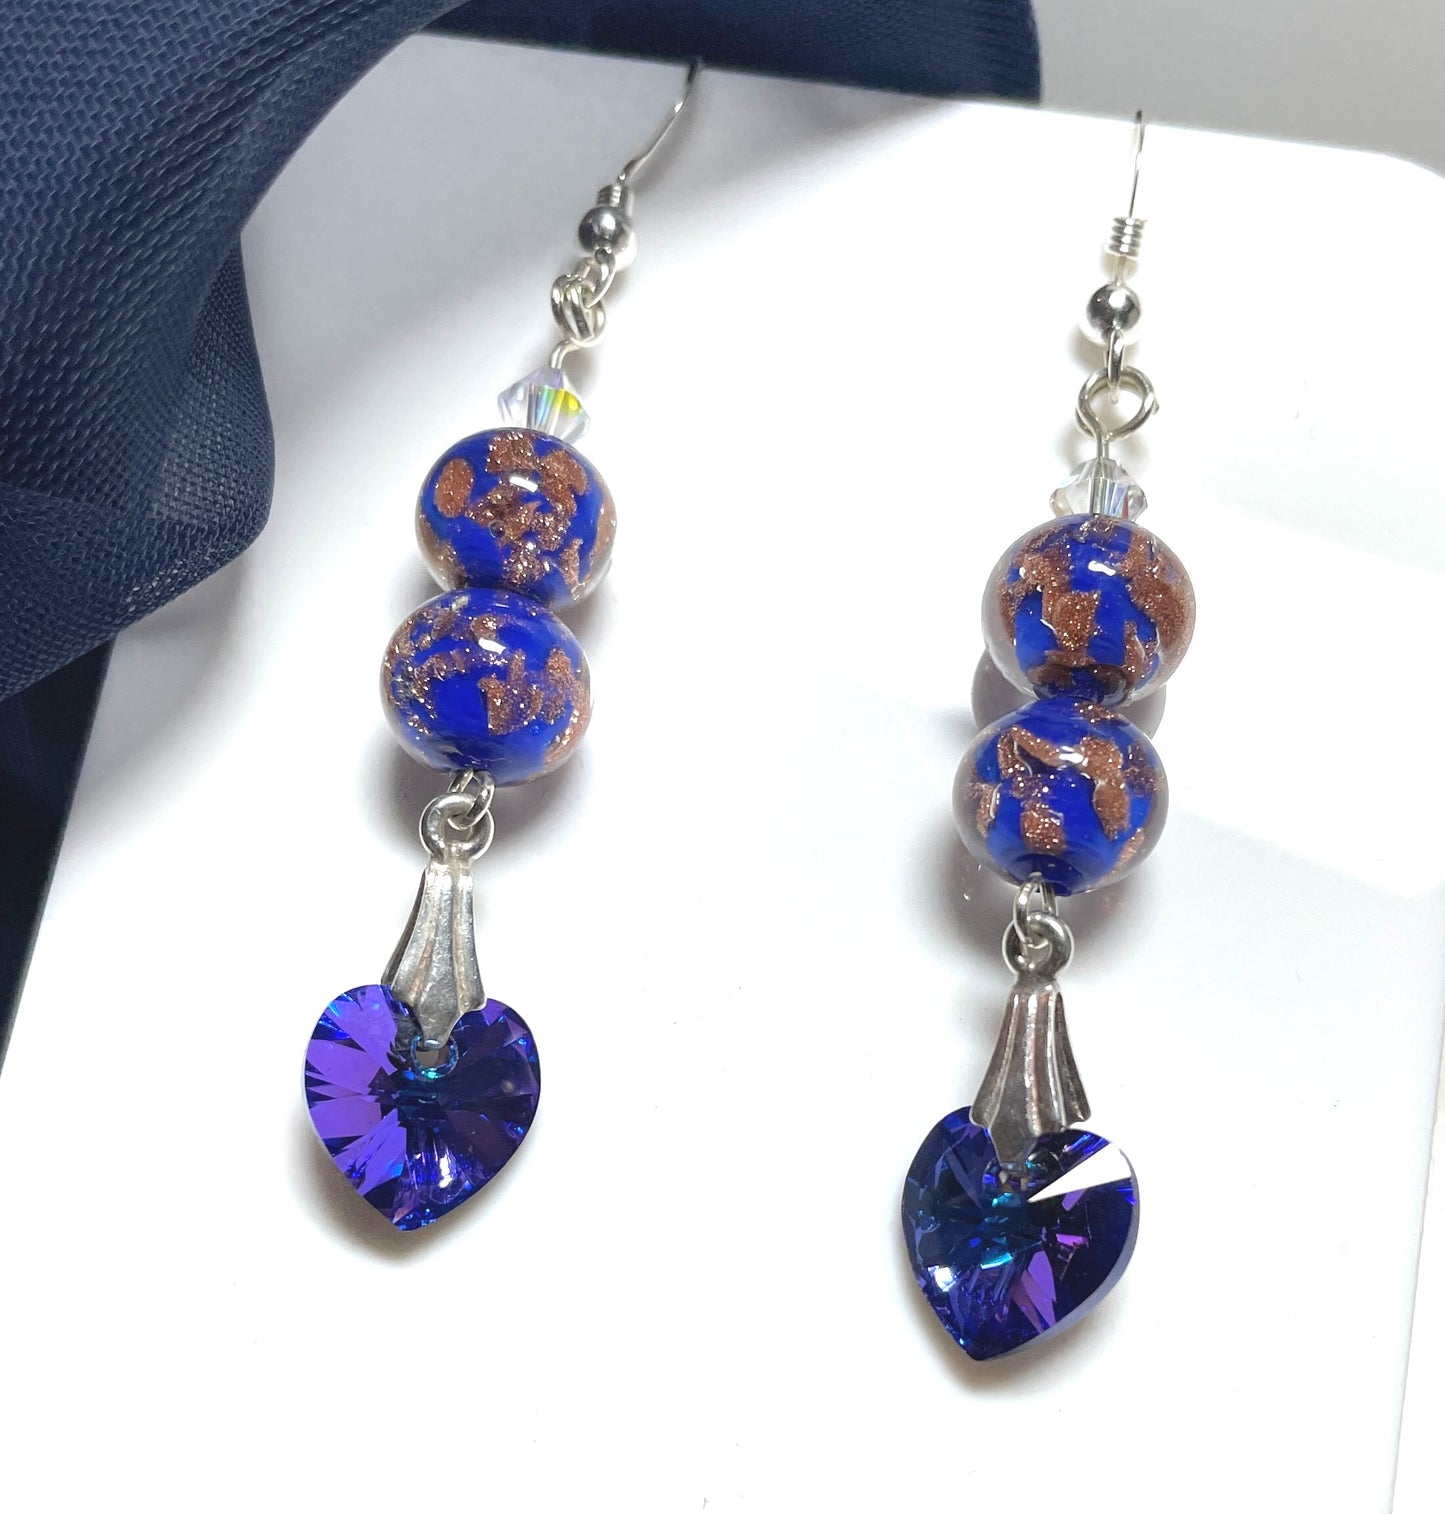 Blue Murano glass drop earrings made with 2 beads and crystal hearts